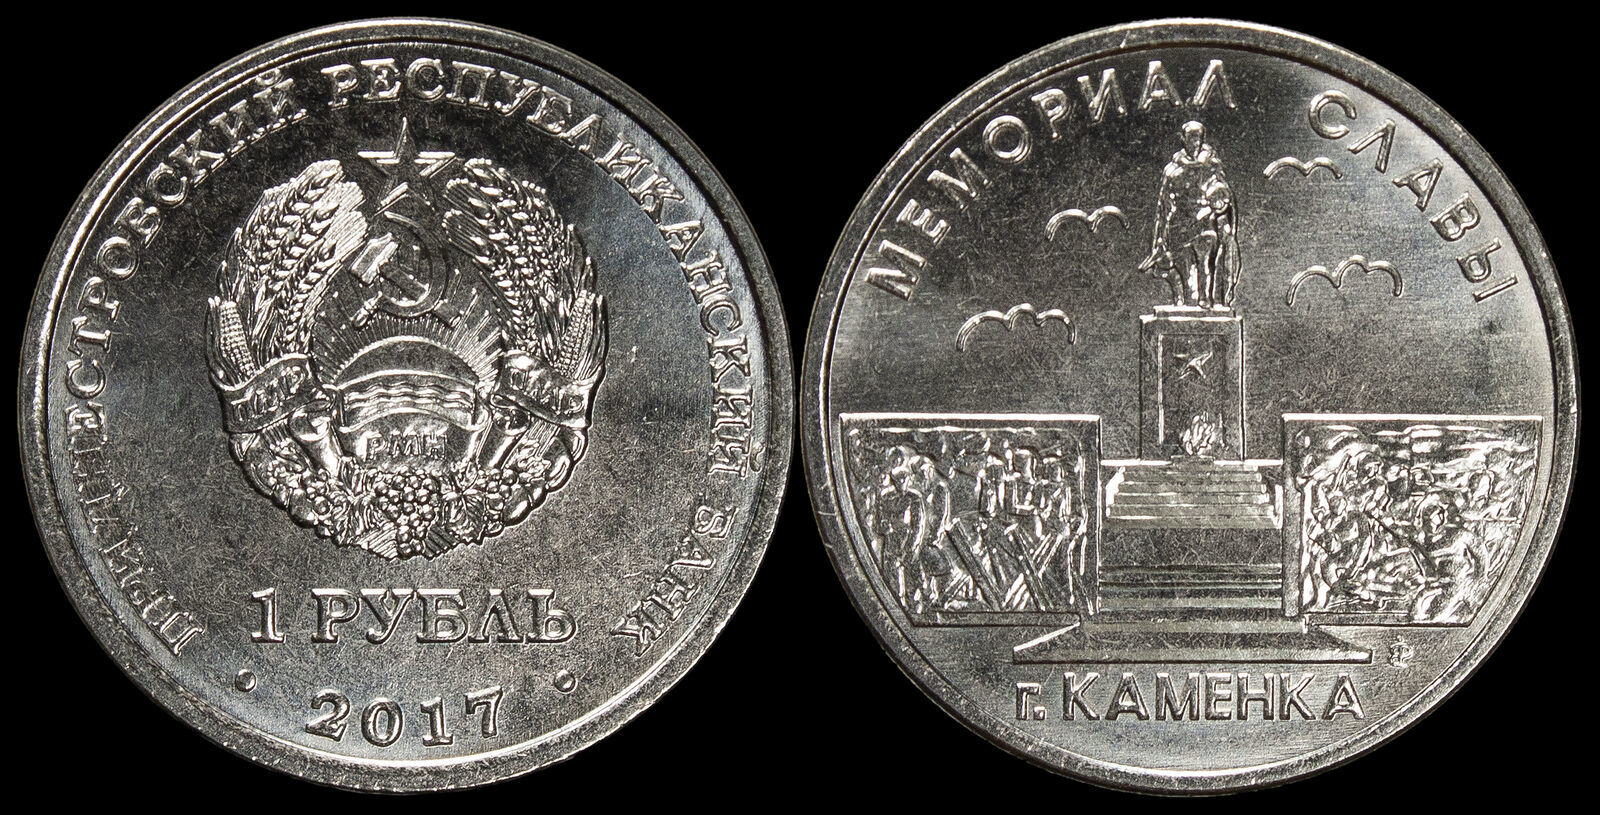 Primary image for Transnistria 1 Ruble. 2017 (Coin KM#NL. Unc) Memorial of Glory in Kamenka